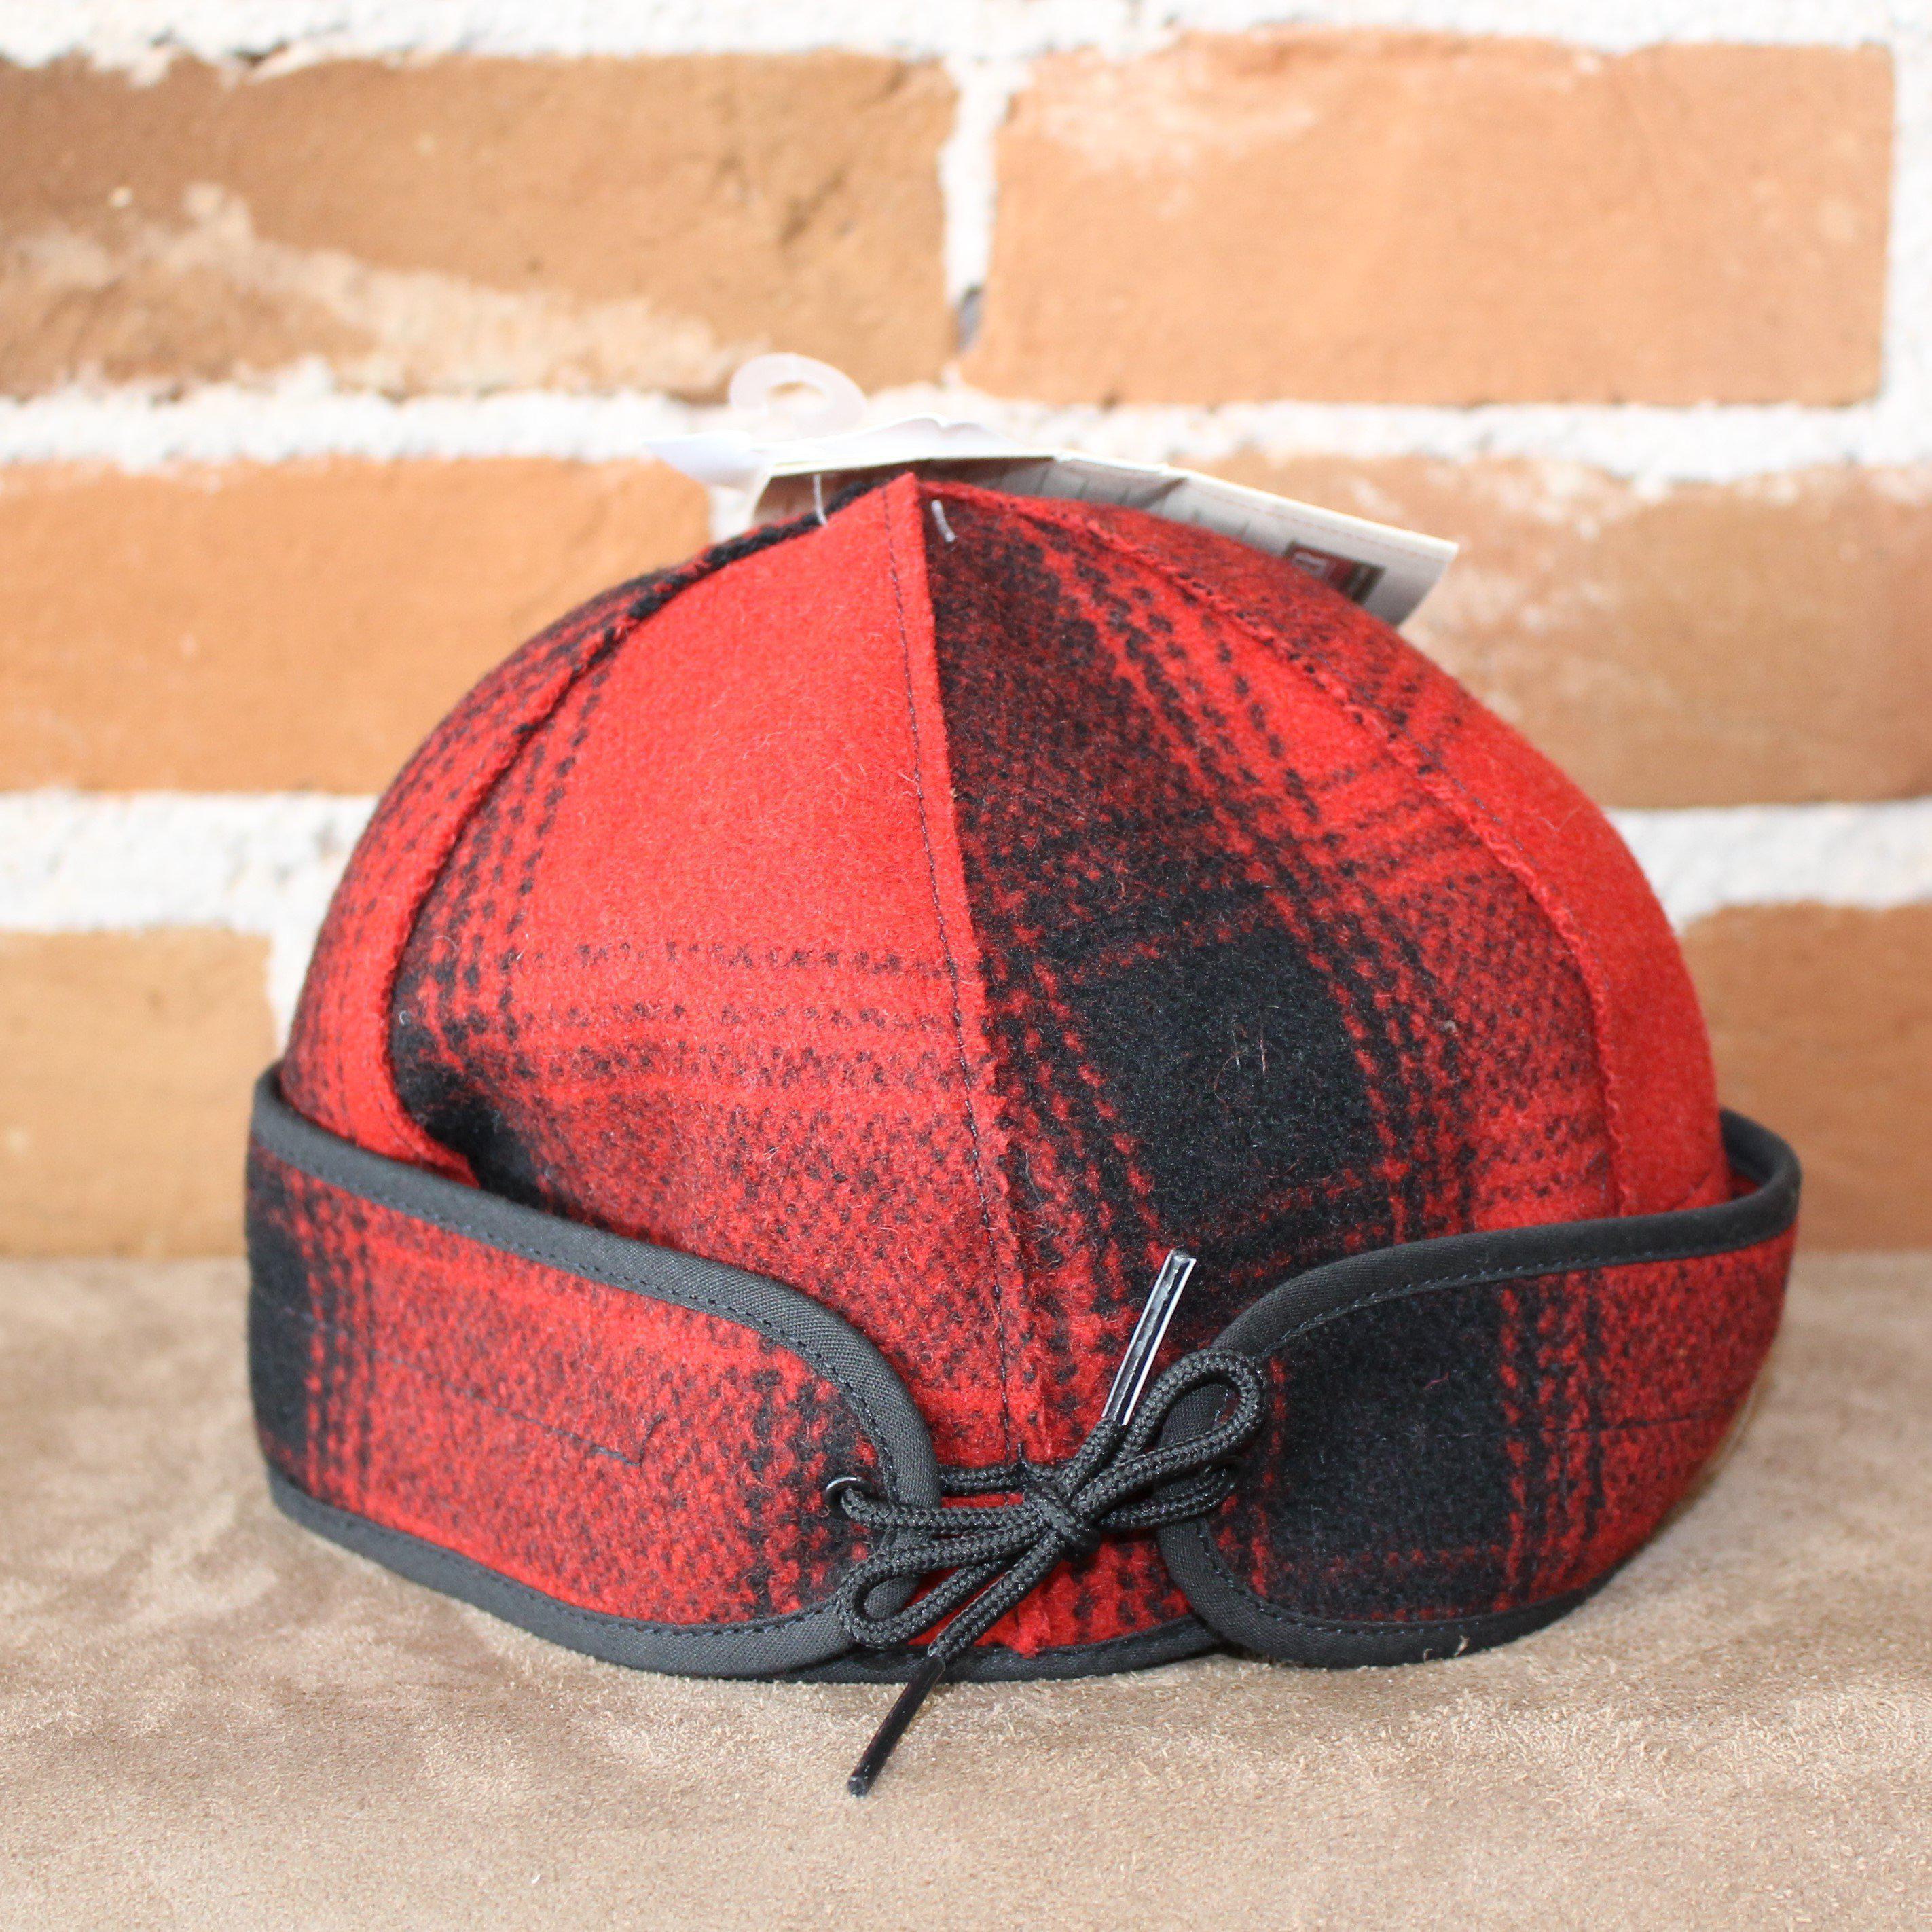 Hochgelobt Brimless Cap In 79 – And Atomic Plaid Black Red